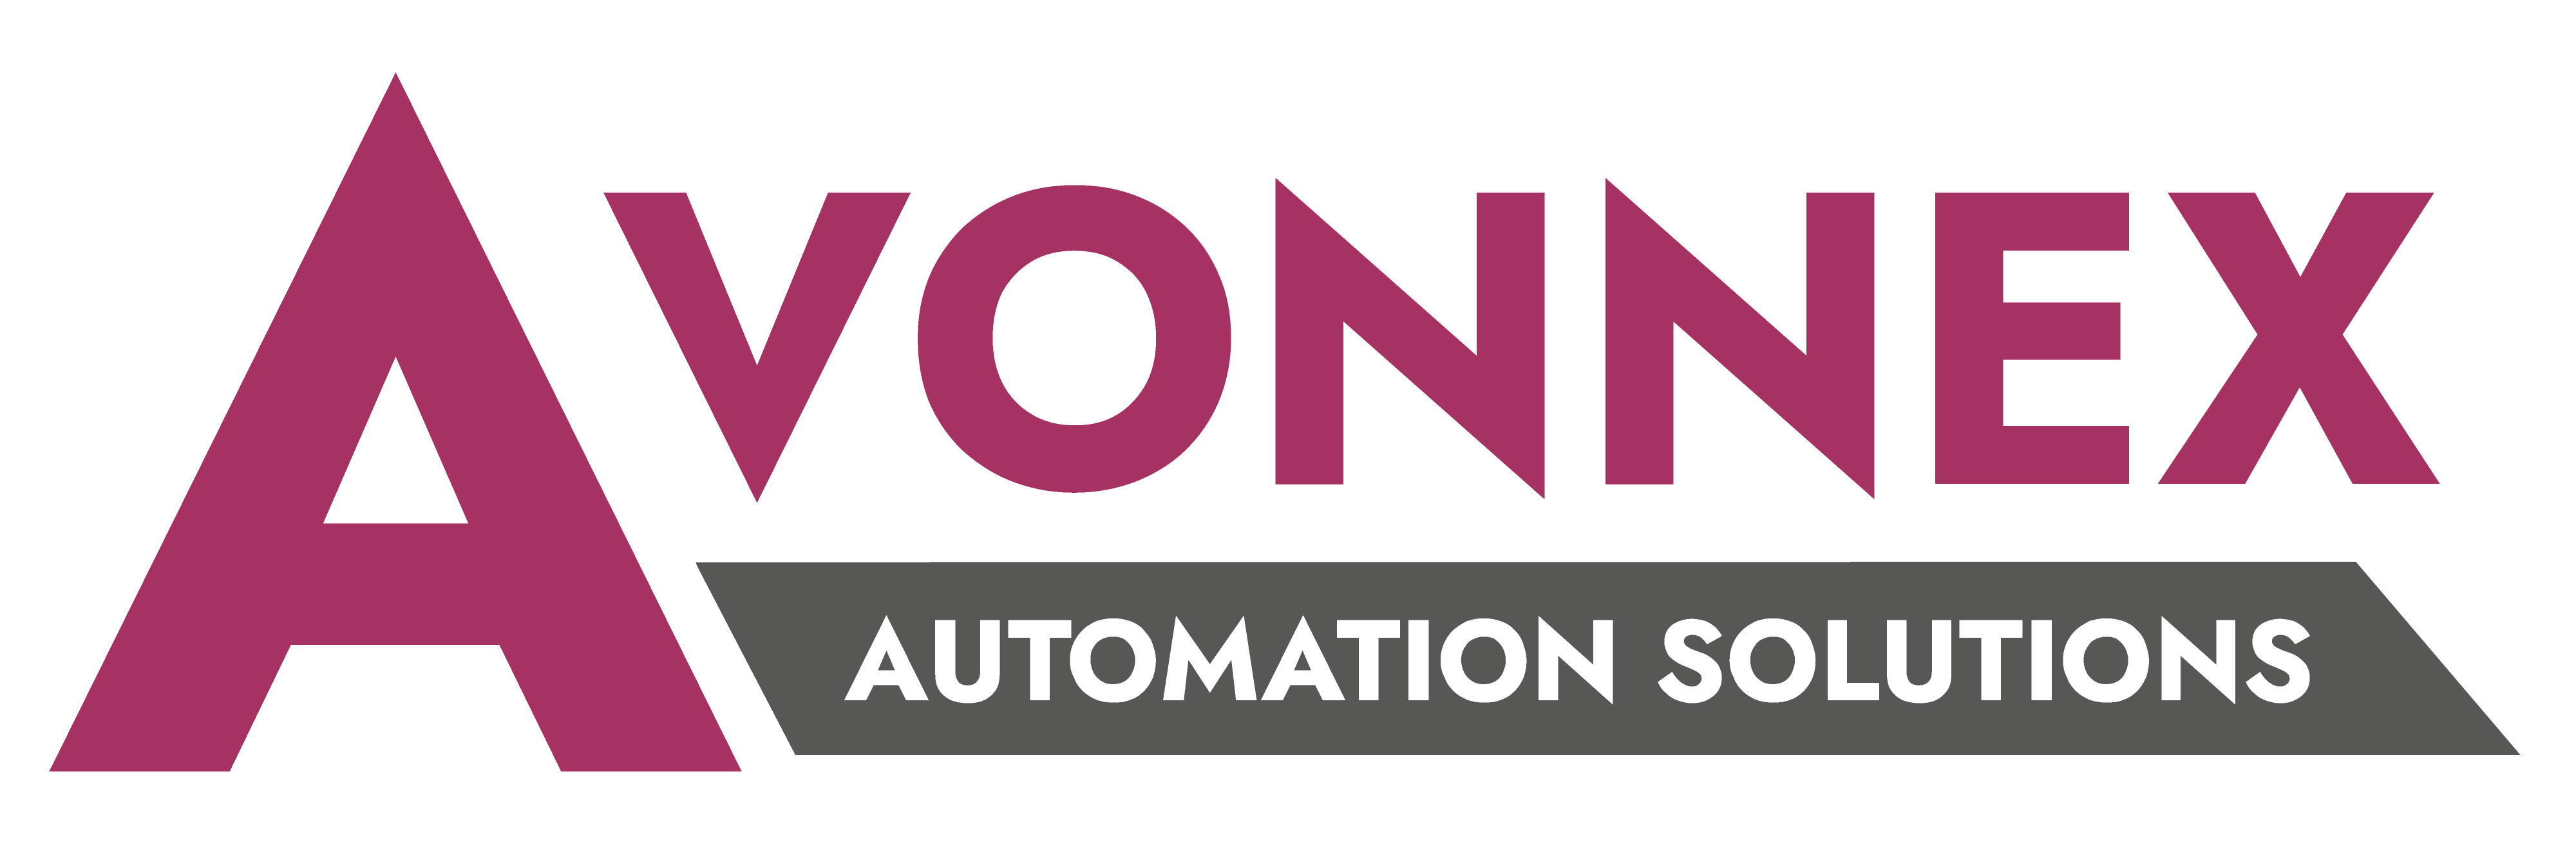 Avonnex Integration available with RxWeb